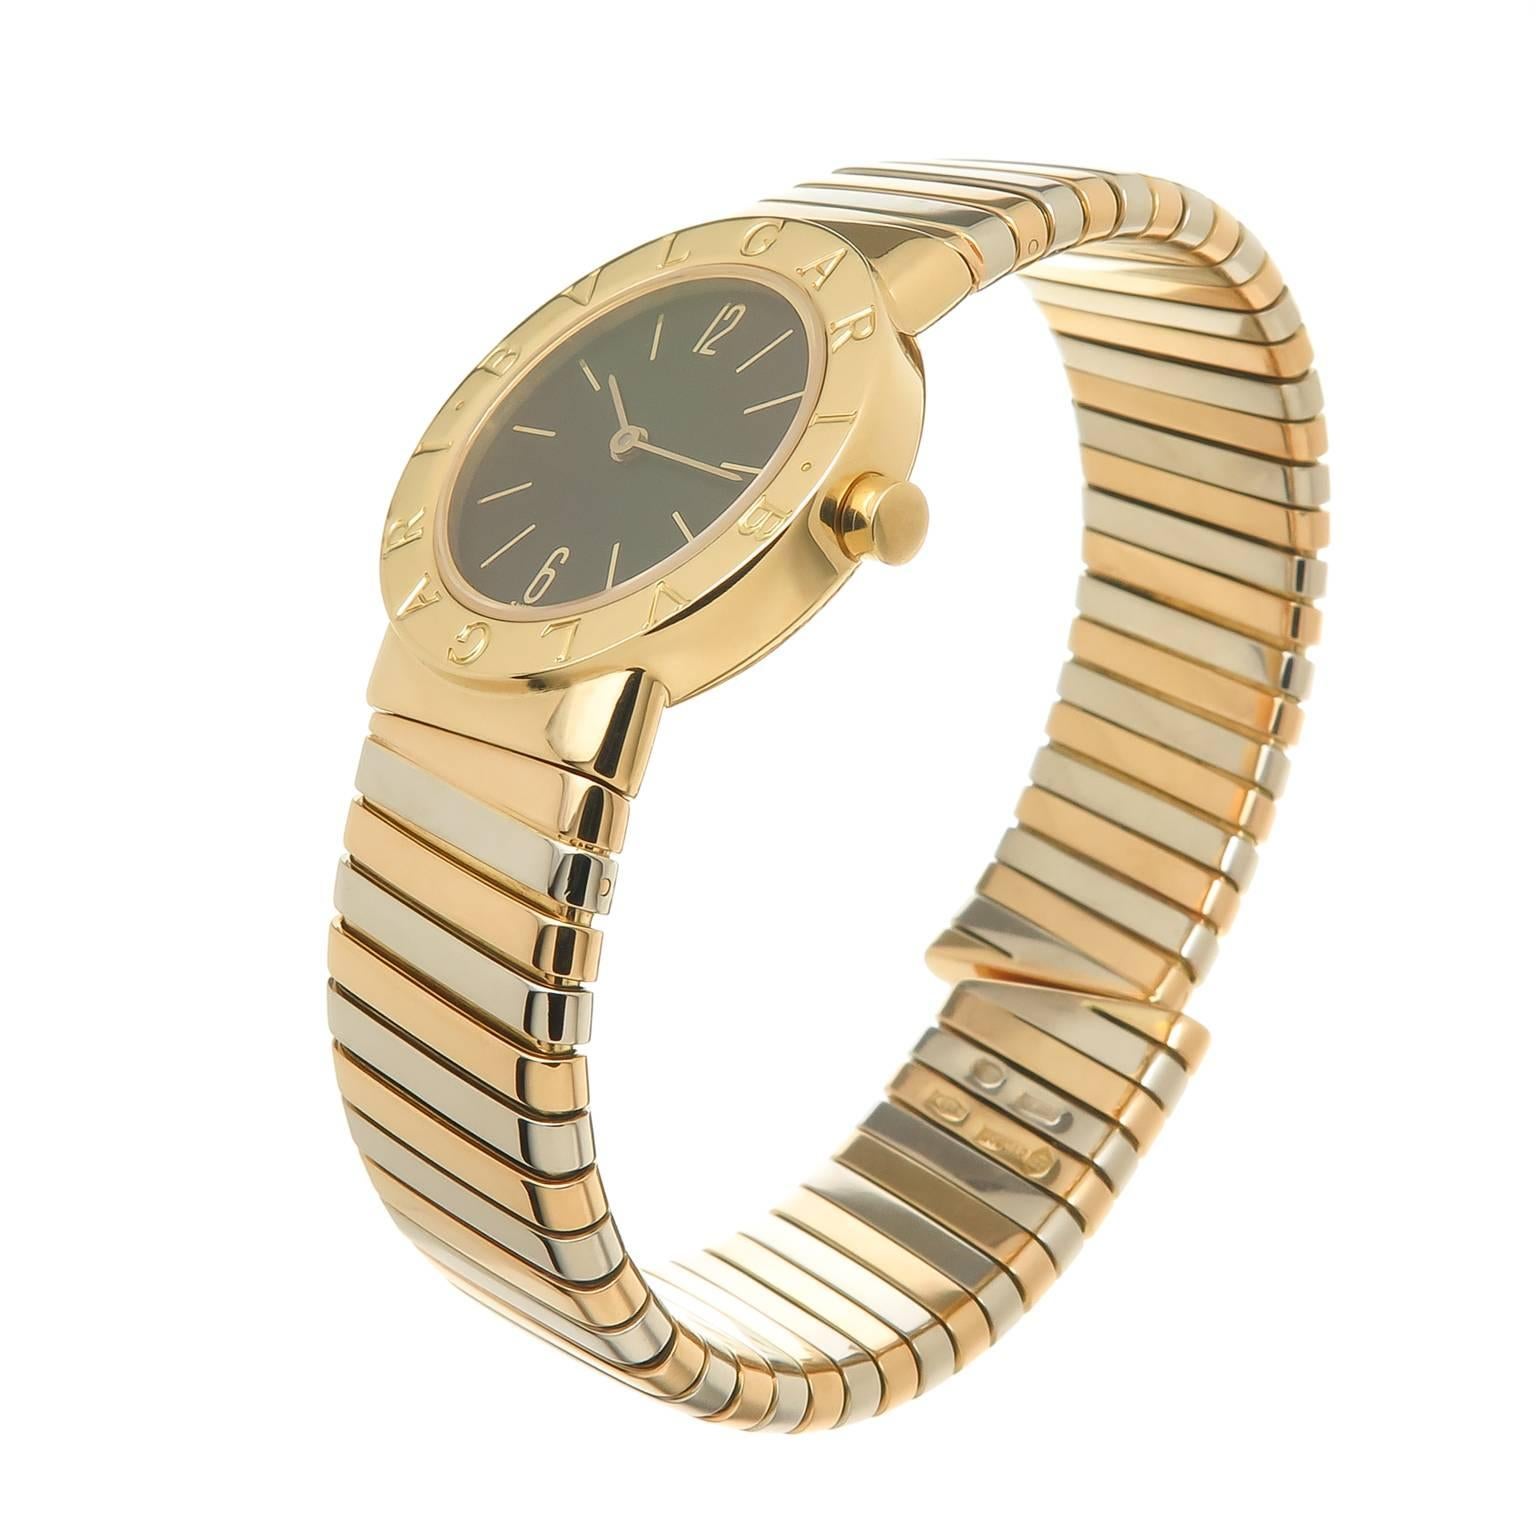 Circa 2000 Bulgari,  Tubogas Bulgari Bulgari Collection Ladies Watch, 18K Yellow, Rose and White Gold with a yellow Gold 26 MM Water resistant case, quartz movement, Black Dial with gold Markers. 5/8 inch wide Tri Color flexible bracelet that will